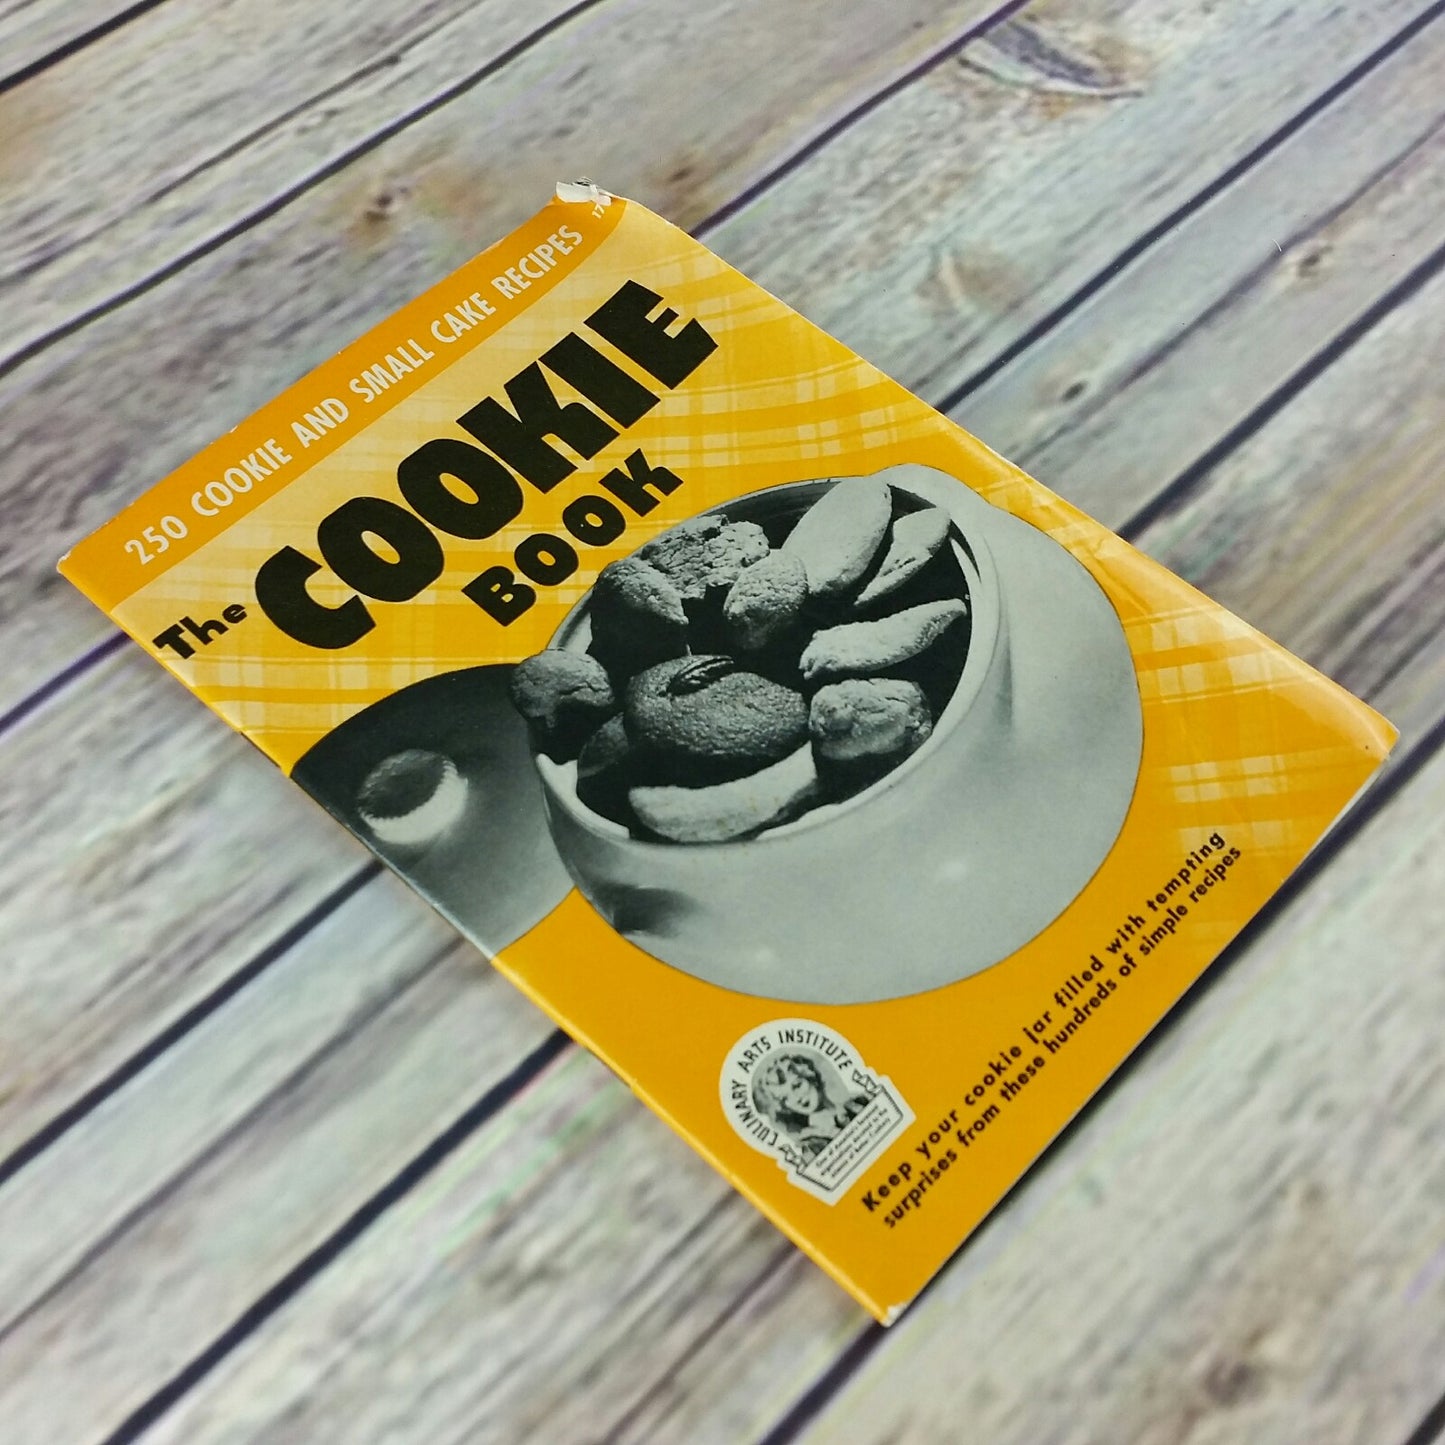 Vintage Cookbook The Cookie Book 1941 250 Recipes Culinary Arts Institute Ruth Berolzheimer Paperback - At Grandma's Table